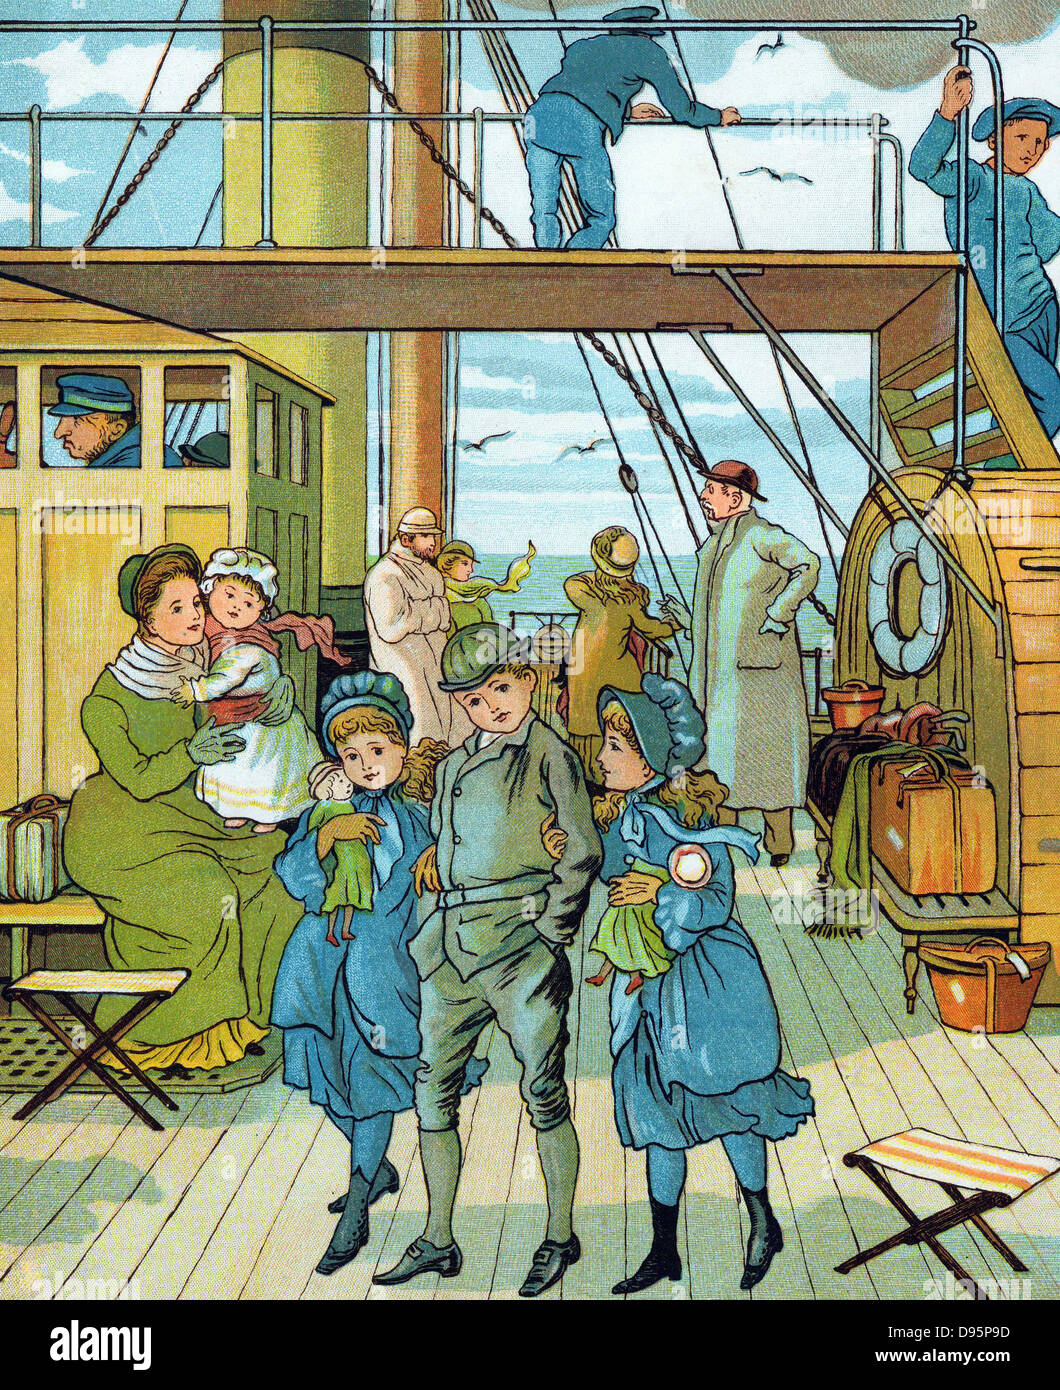 English family taking the air on deck crossing the English Channel on a steamer on their way to France for a continental holiday. Little girls, arm-in-arm with older brother, clutch their dolls. Wind blows scarves and bonnet ribbons nearly horizontal. On deck are folding stools, luggage on bench, and leather hatbox.  Chromolithograph  1886. Stock Photo